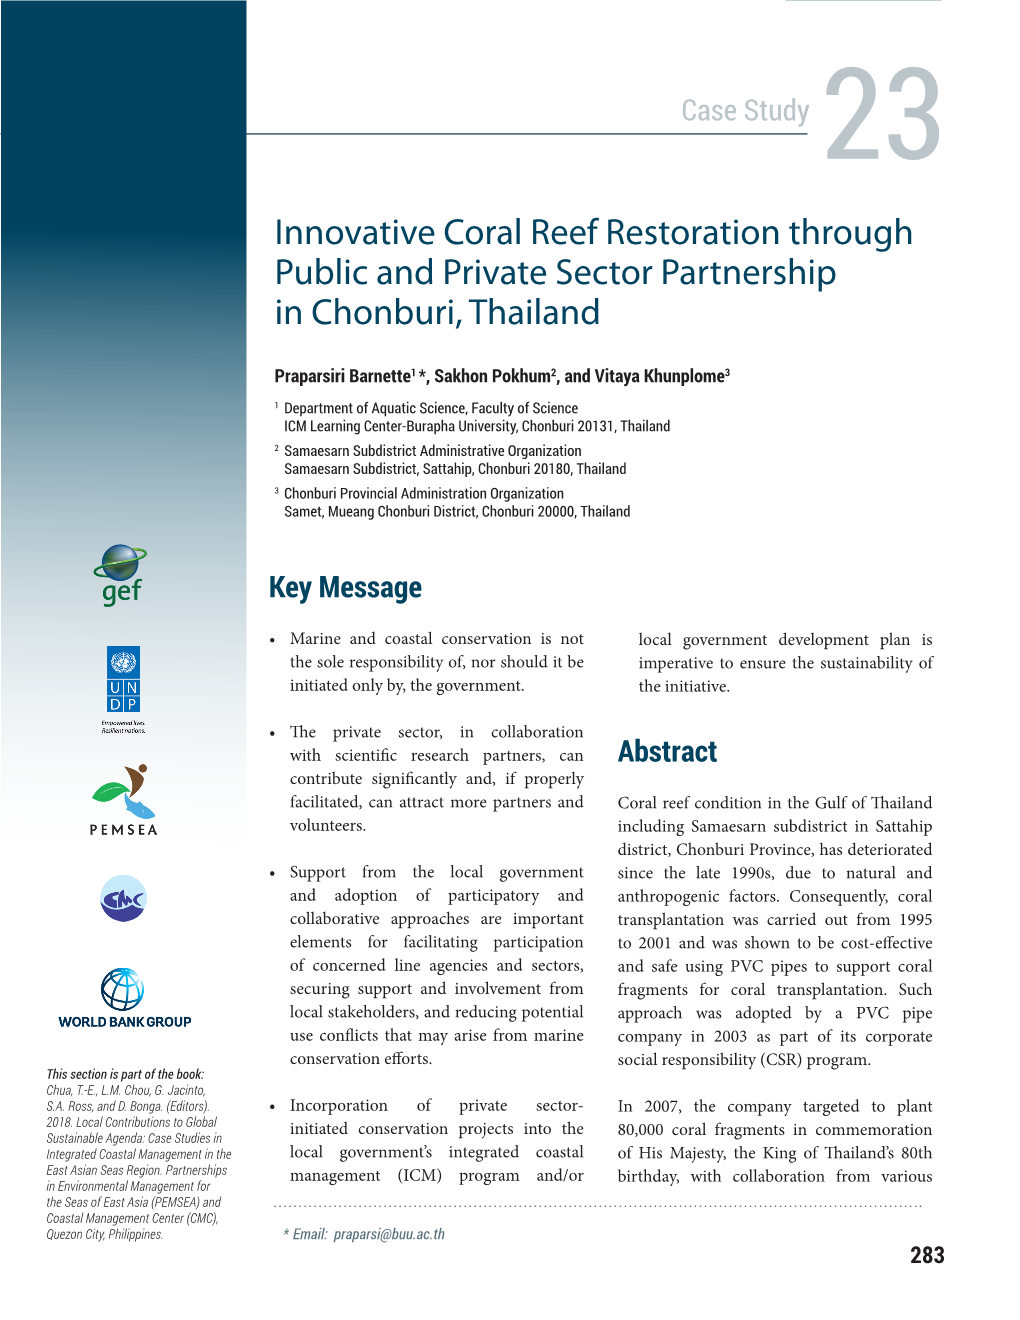 Innovative Coral Reef Restoration Through Public and Private Sector